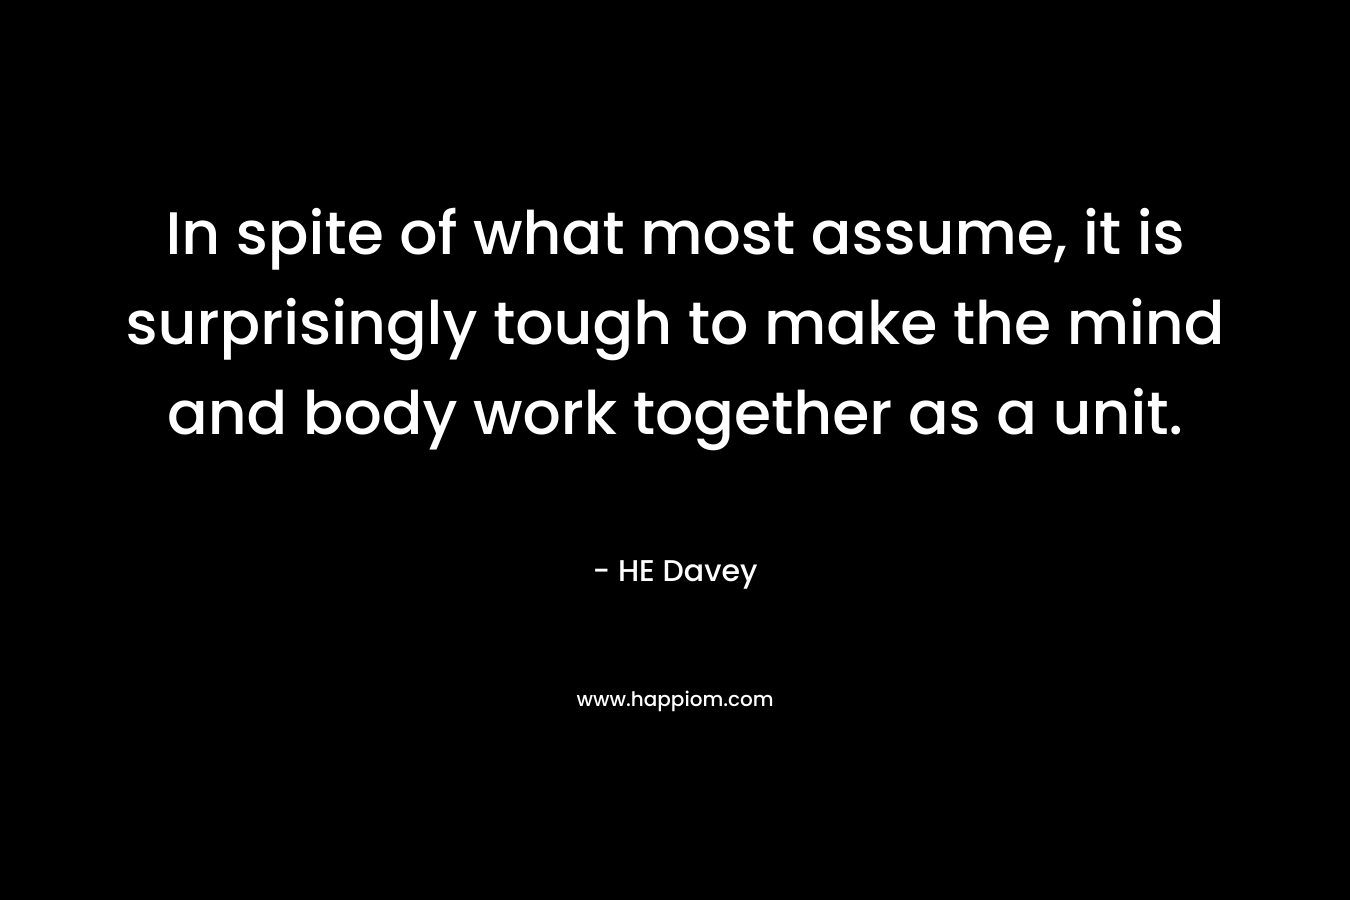 In spite of what most assume, it is surprisingly tough to make the mind and body work together as a unit. – HE Davey